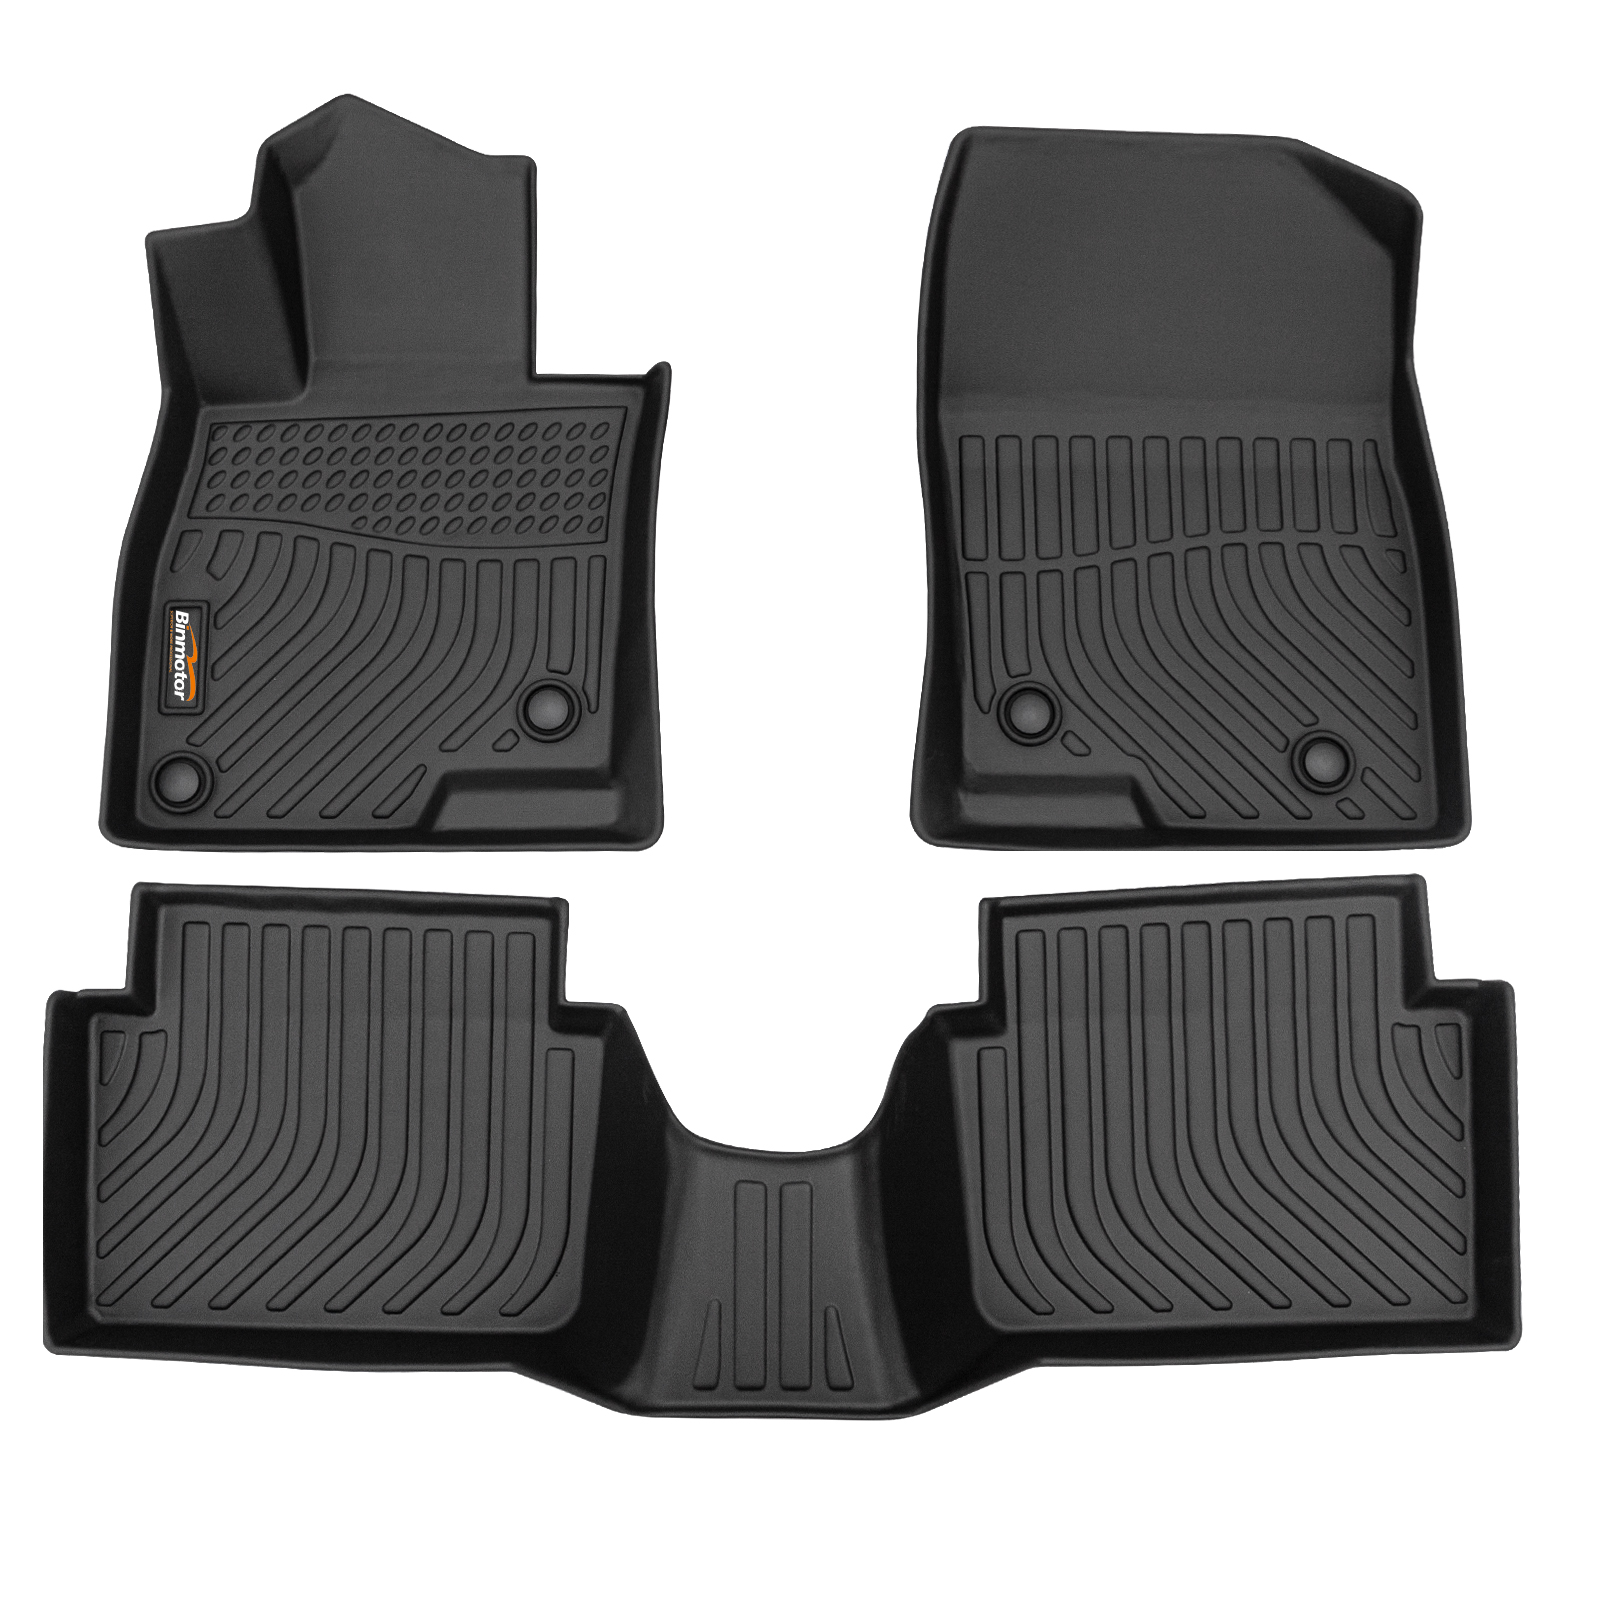 Binmotor-Floor Mats Custom for Mazda 3 All Weather Protection TPE Waterproof Non-Slip Car Floor Liners 1st & 2nd Row Set Accessories Black(compatible year 2014-2018)